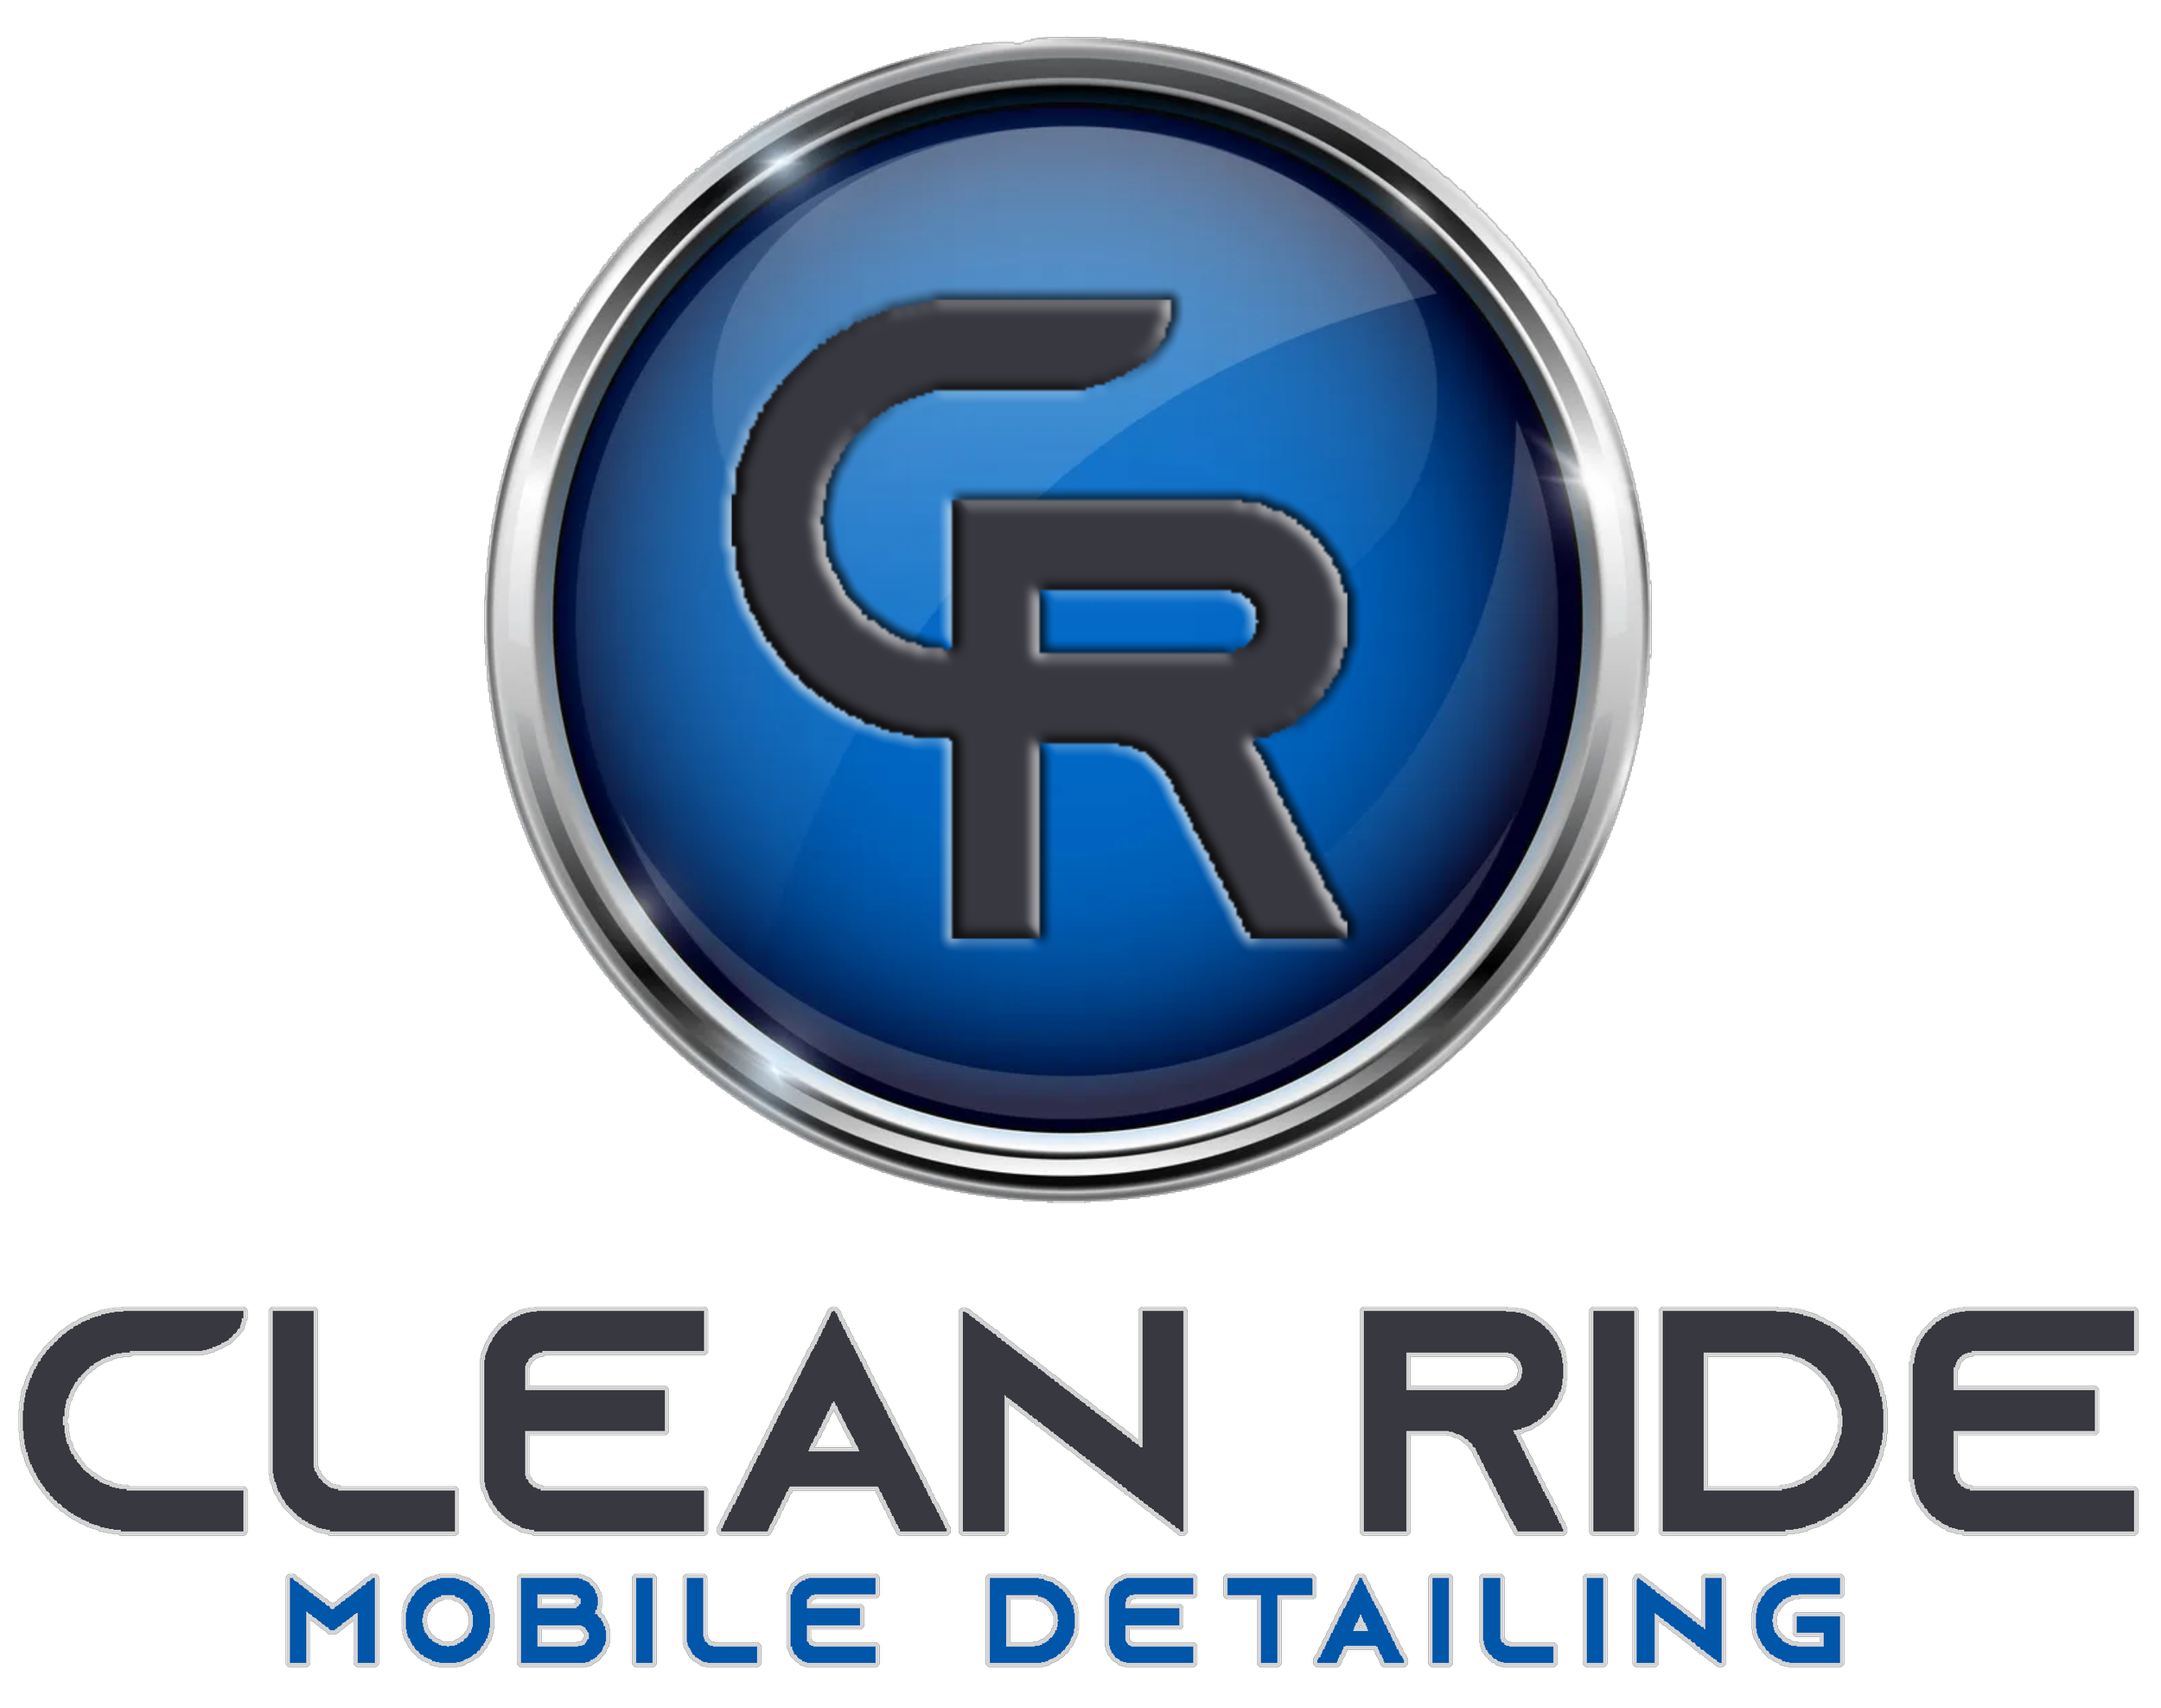 Mobile Auto Detailing & Cleaning - Legendary Cleaning Services